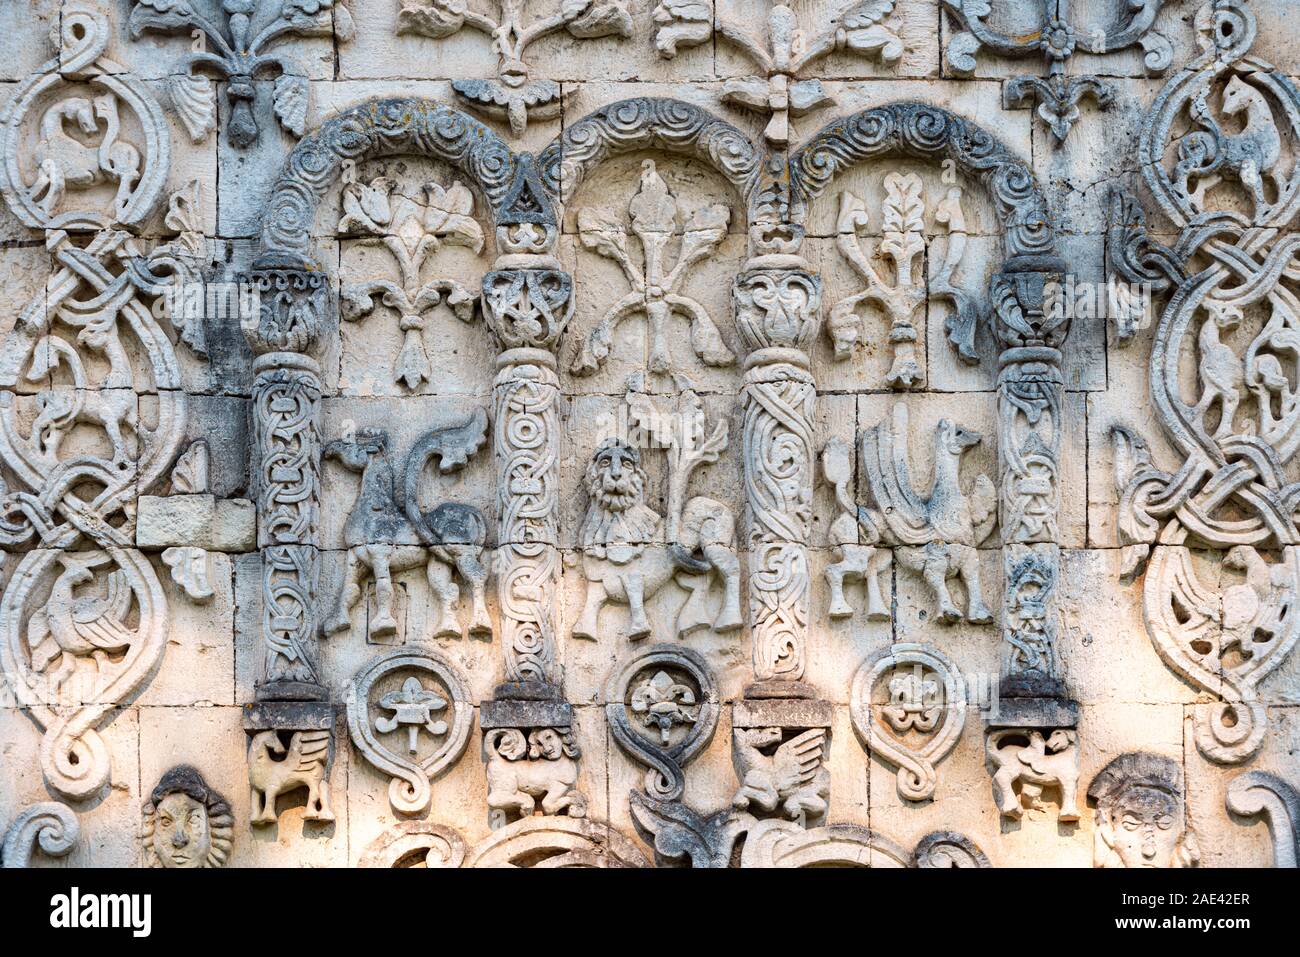 Big wall in church showing fictional characters. Primitive stone carving. Beautiful architecture of religious place. Tourist destination. Stock Photo